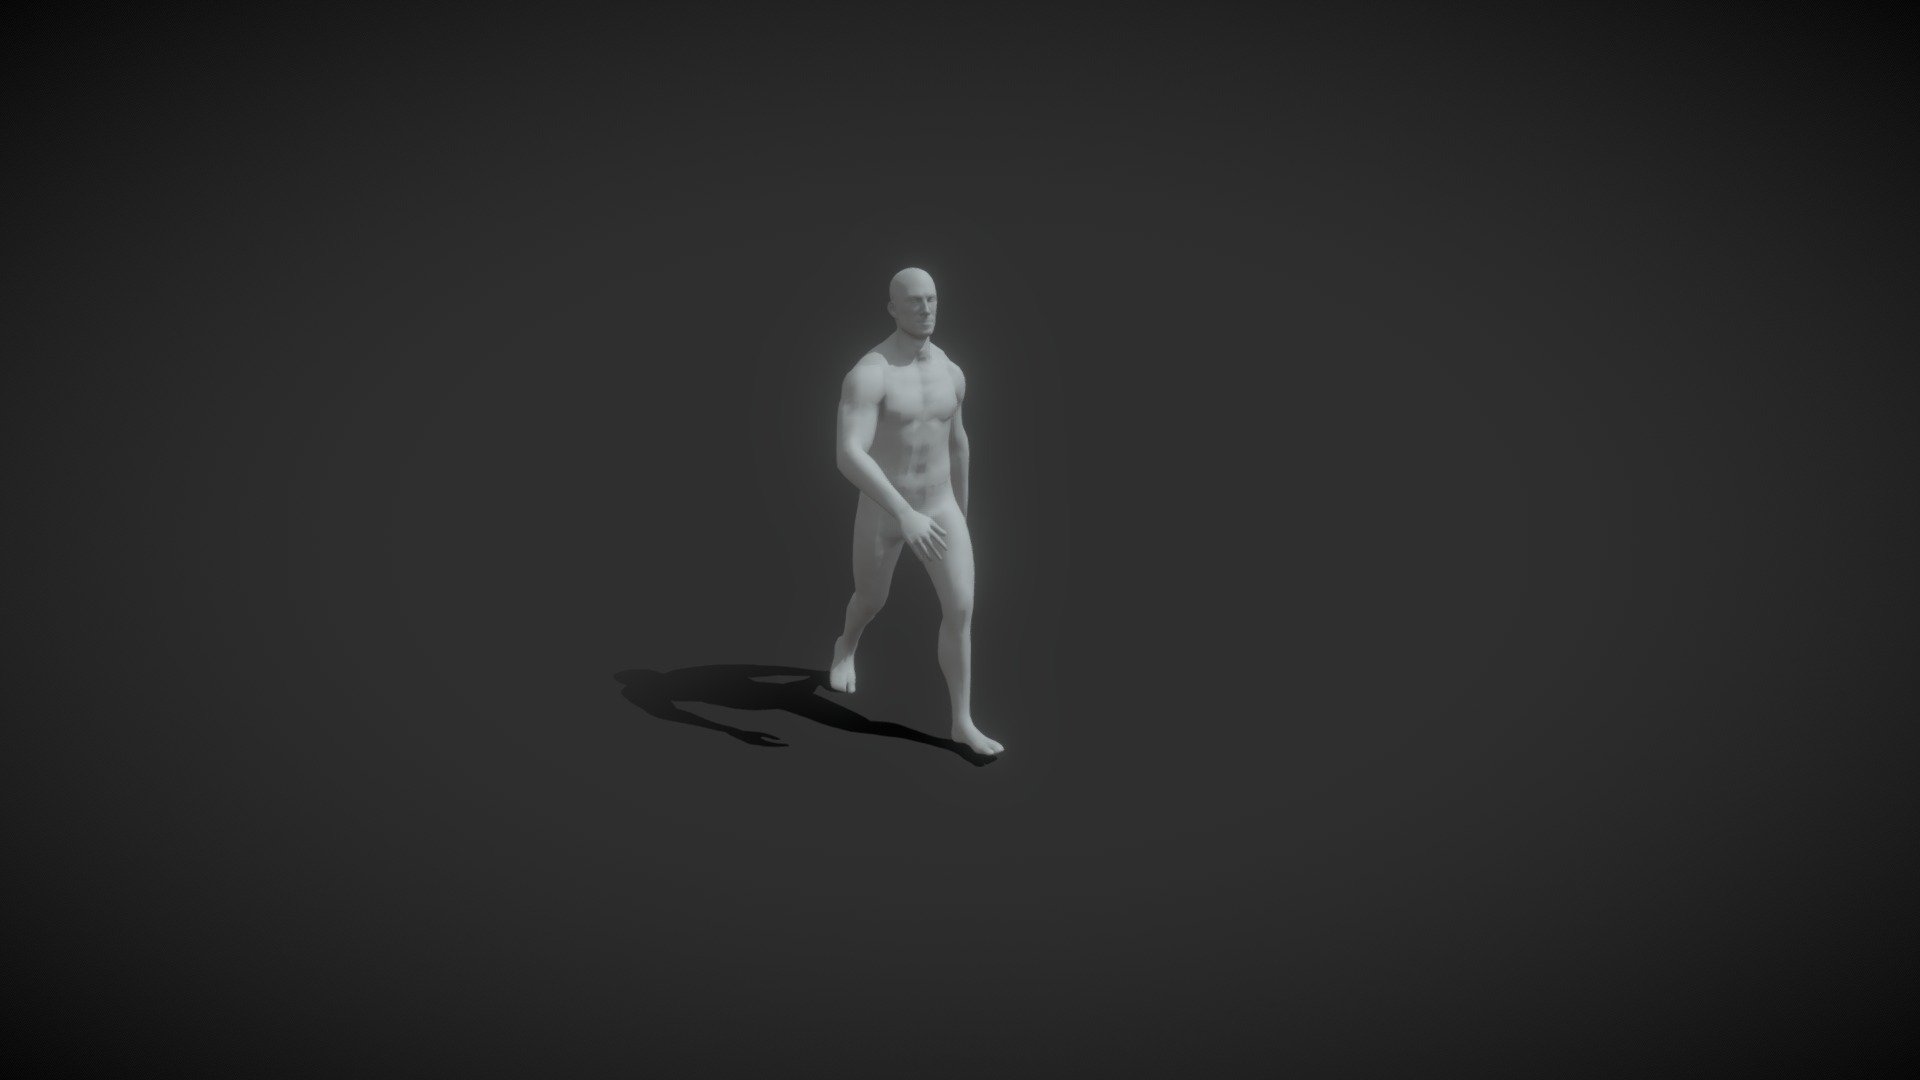 Male Body Base Mesh 28 Animations 3D Model 5k Polygons

Technical details:




File formats included in the package are: FBX, OBJ, GLB, PLY, STL, ABC, DAE, BLEND, gLTF (generated), USDZ (generated)

Native software file format: BLEND

Polygons: 5,282

Vertices: 5,023

The model contains UV Map.

The model is rigged and animated.

28 animations are included.

Following formats contain rig and animation: BLEND, FBX, GLTF/GLB.

Following animations are included:




( standard - 5 animations): idle, sit down &amp; get up, eat, drink, write

( move - 2 animations): walk, run

( exercise - 6 animations): squat, pushup, sit up, crunch, bench press, bicycle riding

( swim - 4 animations): crawl, breaststroke, butterfly, backstroke

( kickboxing - 8 animations): jab punch, cross punch, lead hook, rear hook, lead uppercut, lead bodyshot, rear uppercut, rear bodyshot

( karate - 3 animations): front kick, sidekick, jumping kick
 - Male Body Base Mesh 28 Animations 5k Poly - Buy Royalty Free 3D model by 3DDisco 3d model